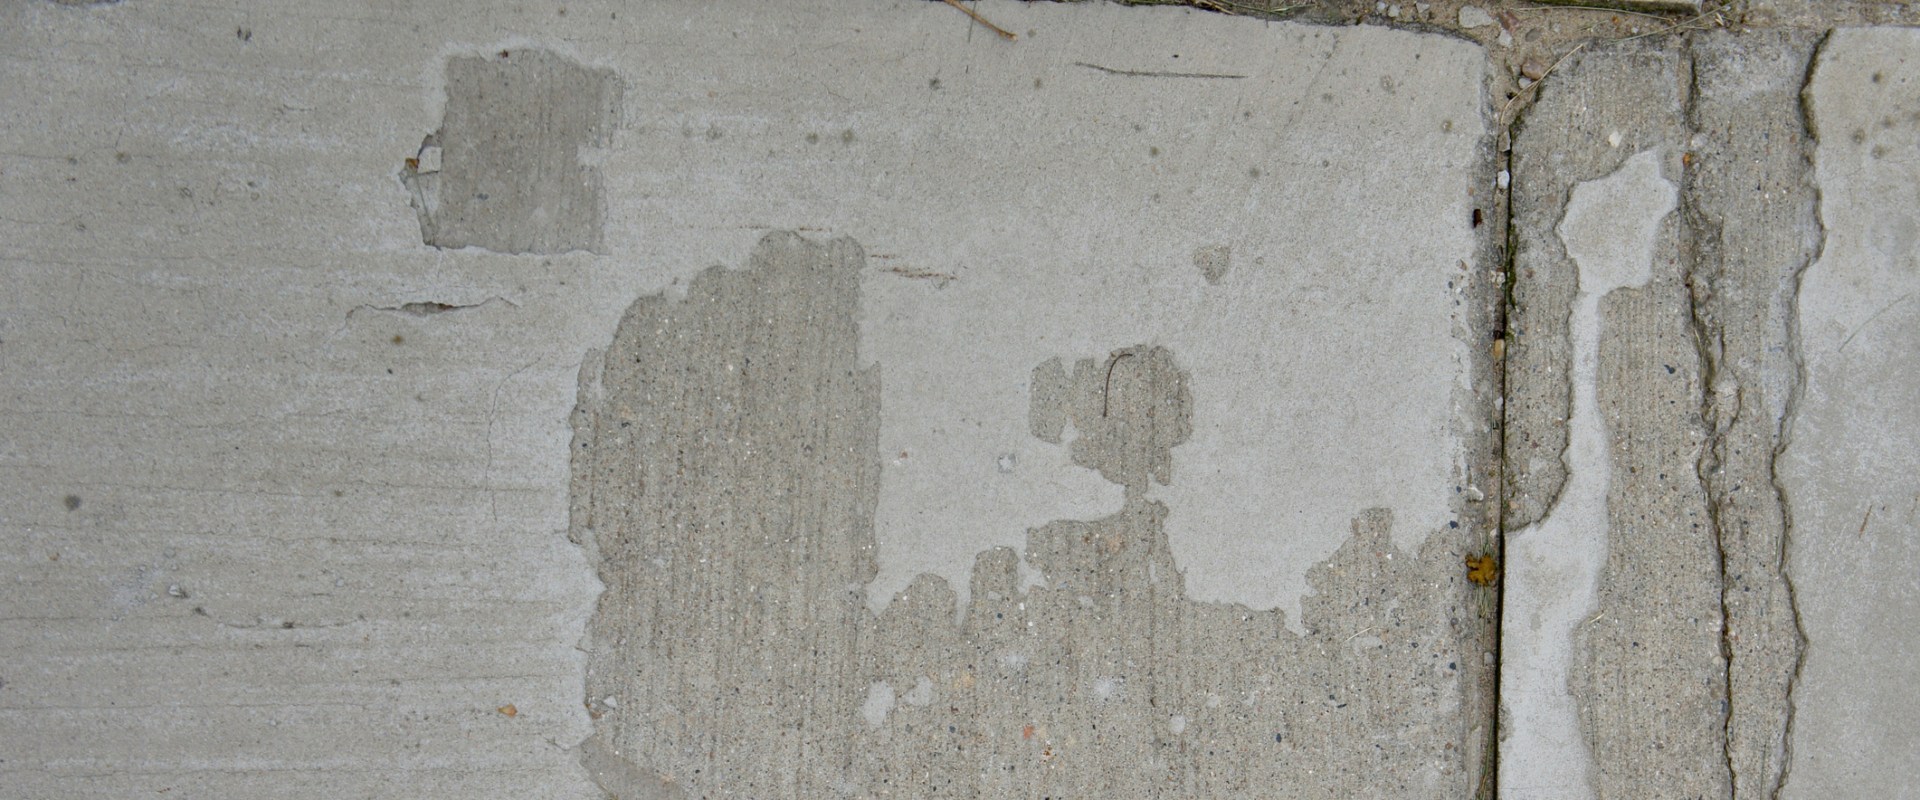 How to Prevent Concrete Spalling and Its Causes